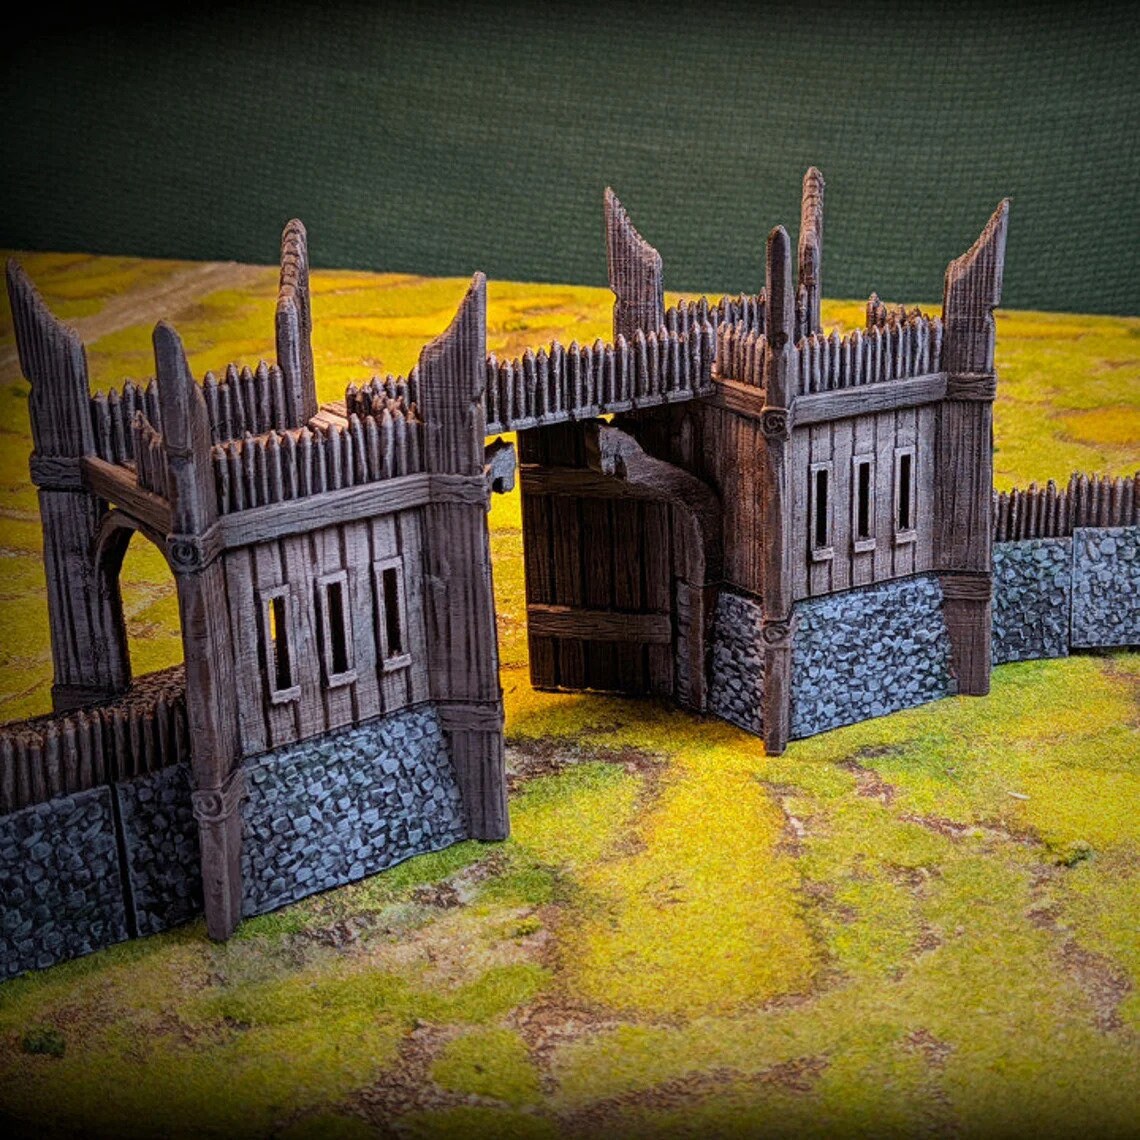 Kingdom of Saxonia Gatehouse wargaming terrain designed by Conquest Creations 3D printed by Forgemaster Miniatures